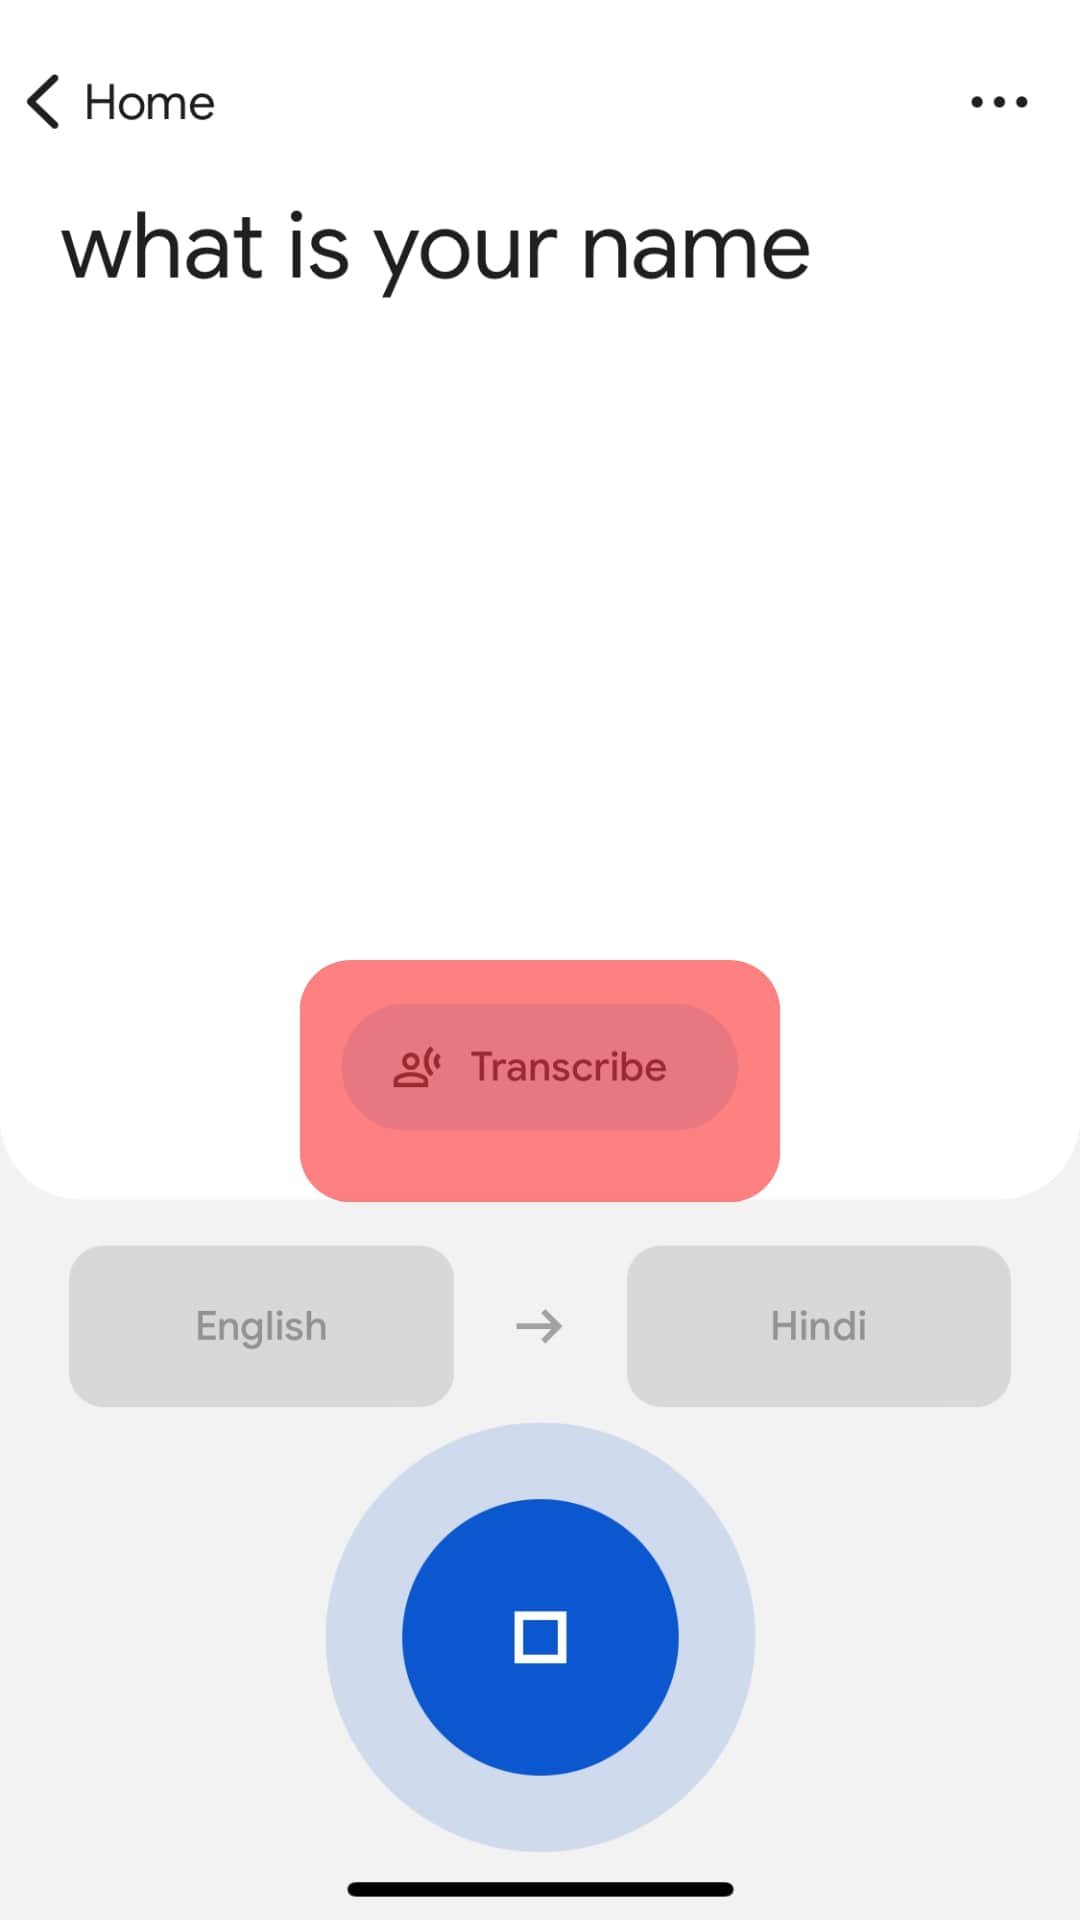 Tap On Transcribe To Translate The Text From Audio.